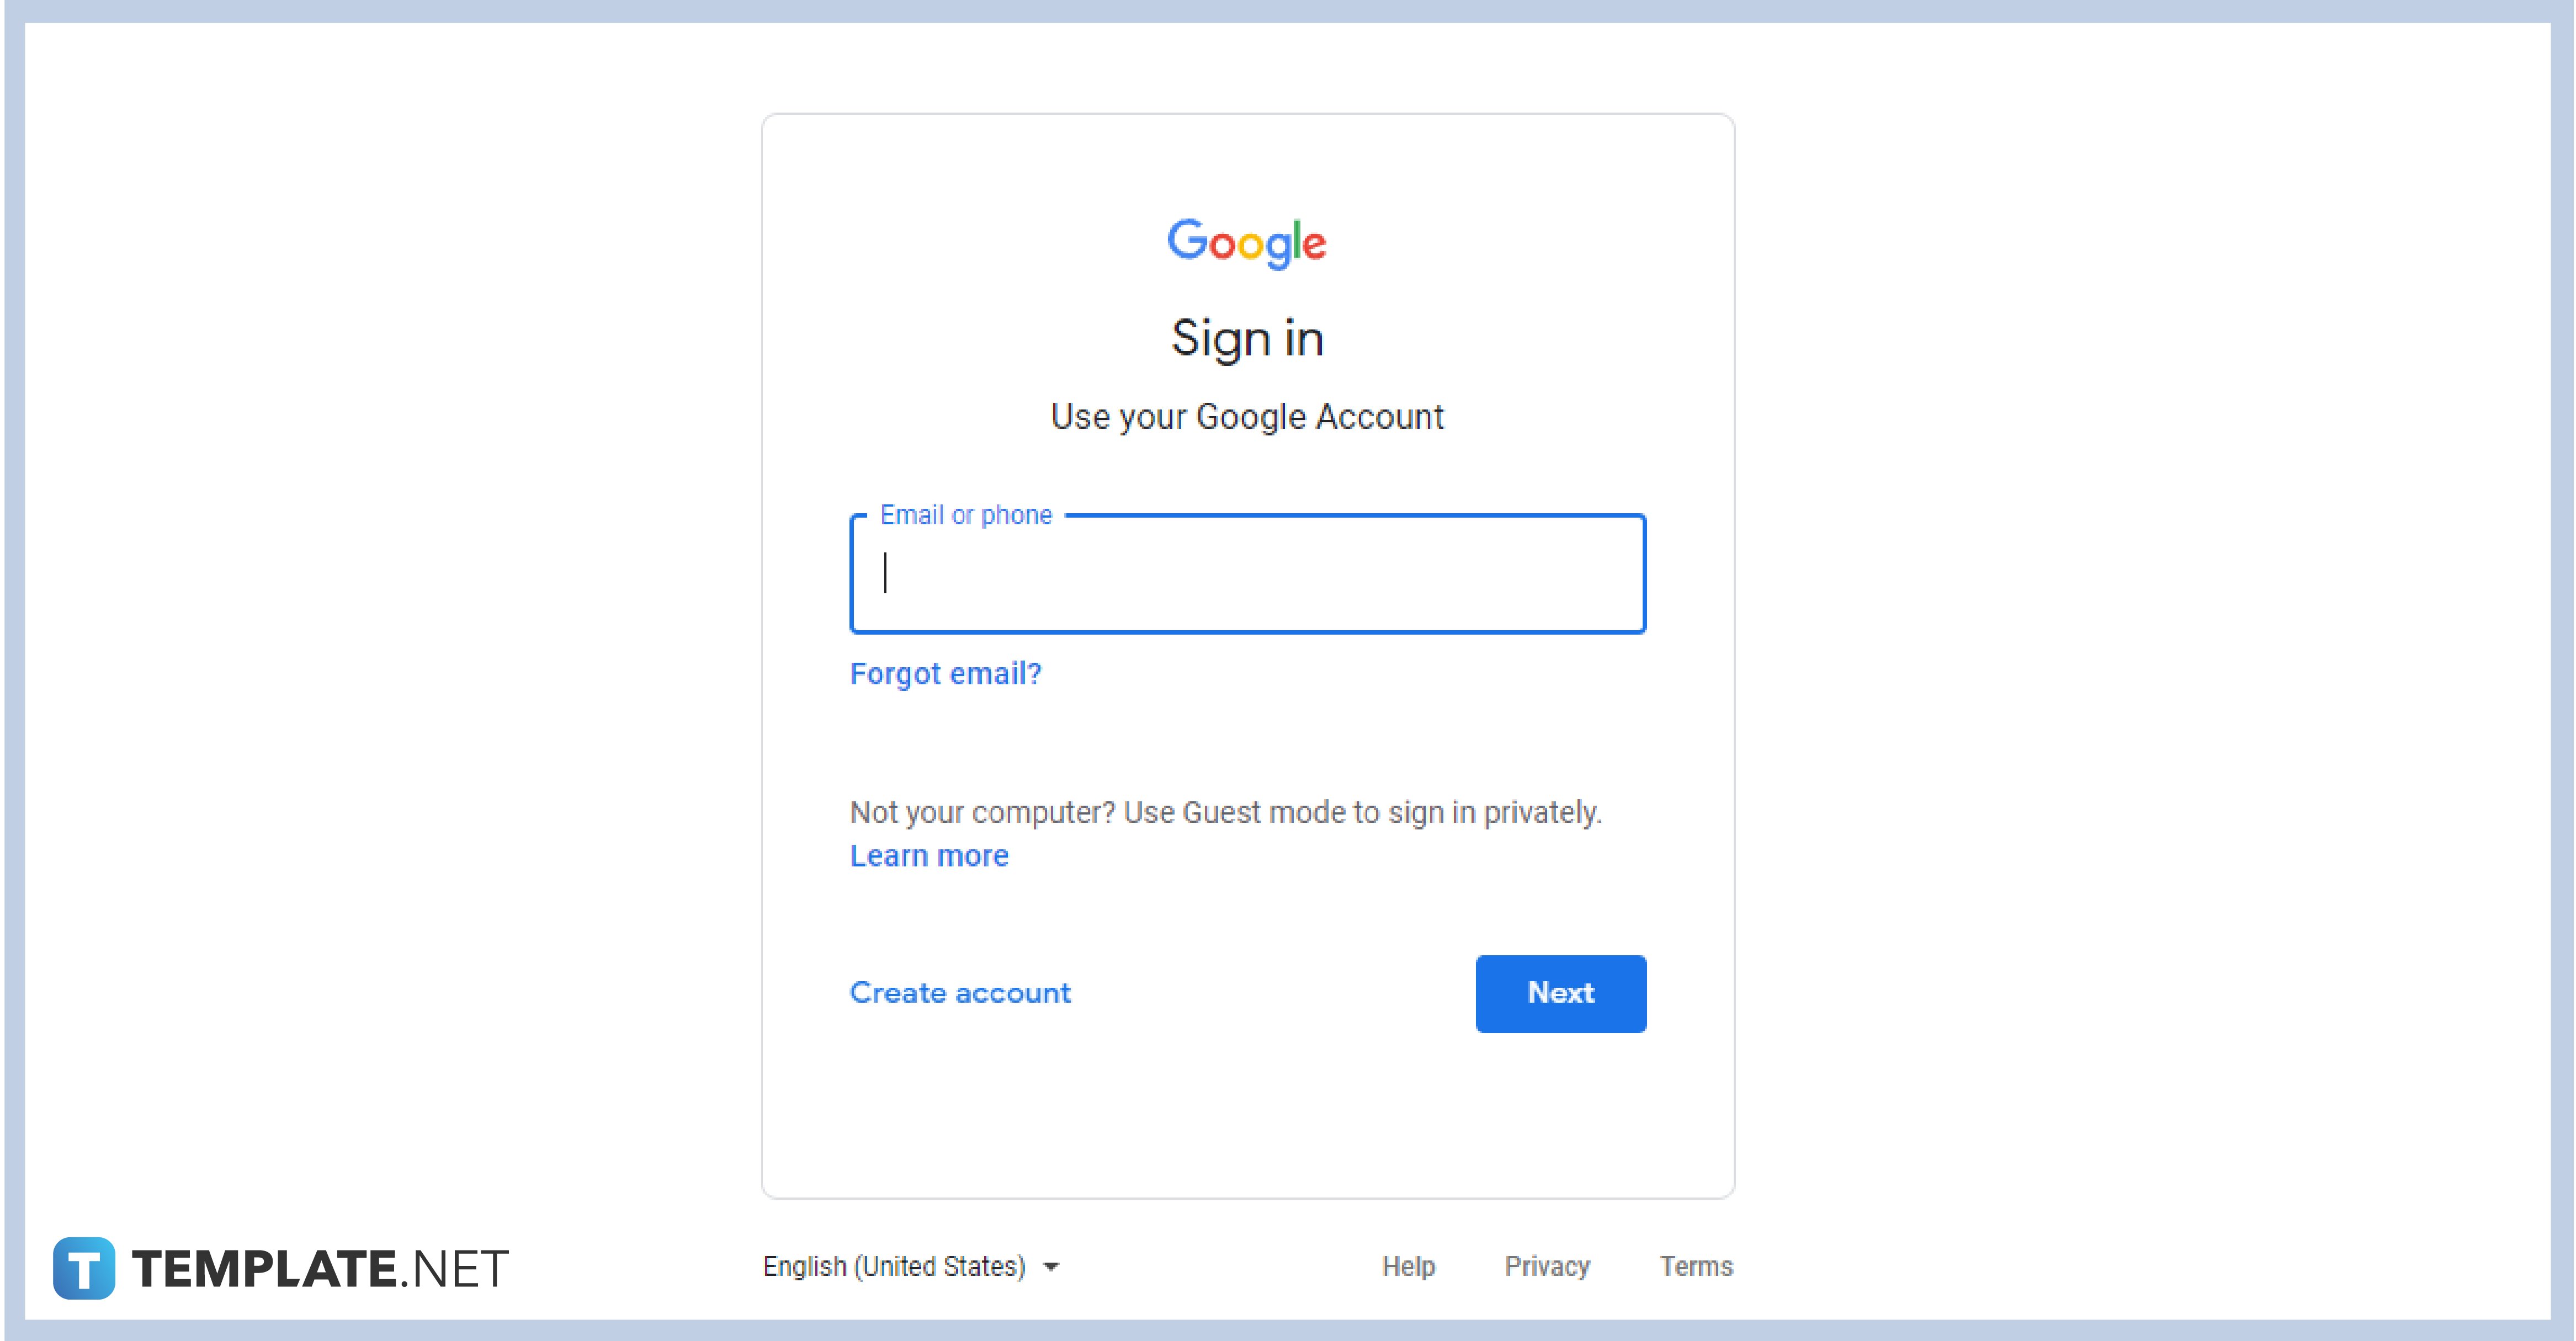 step-1-sign-in-with-your-account-019